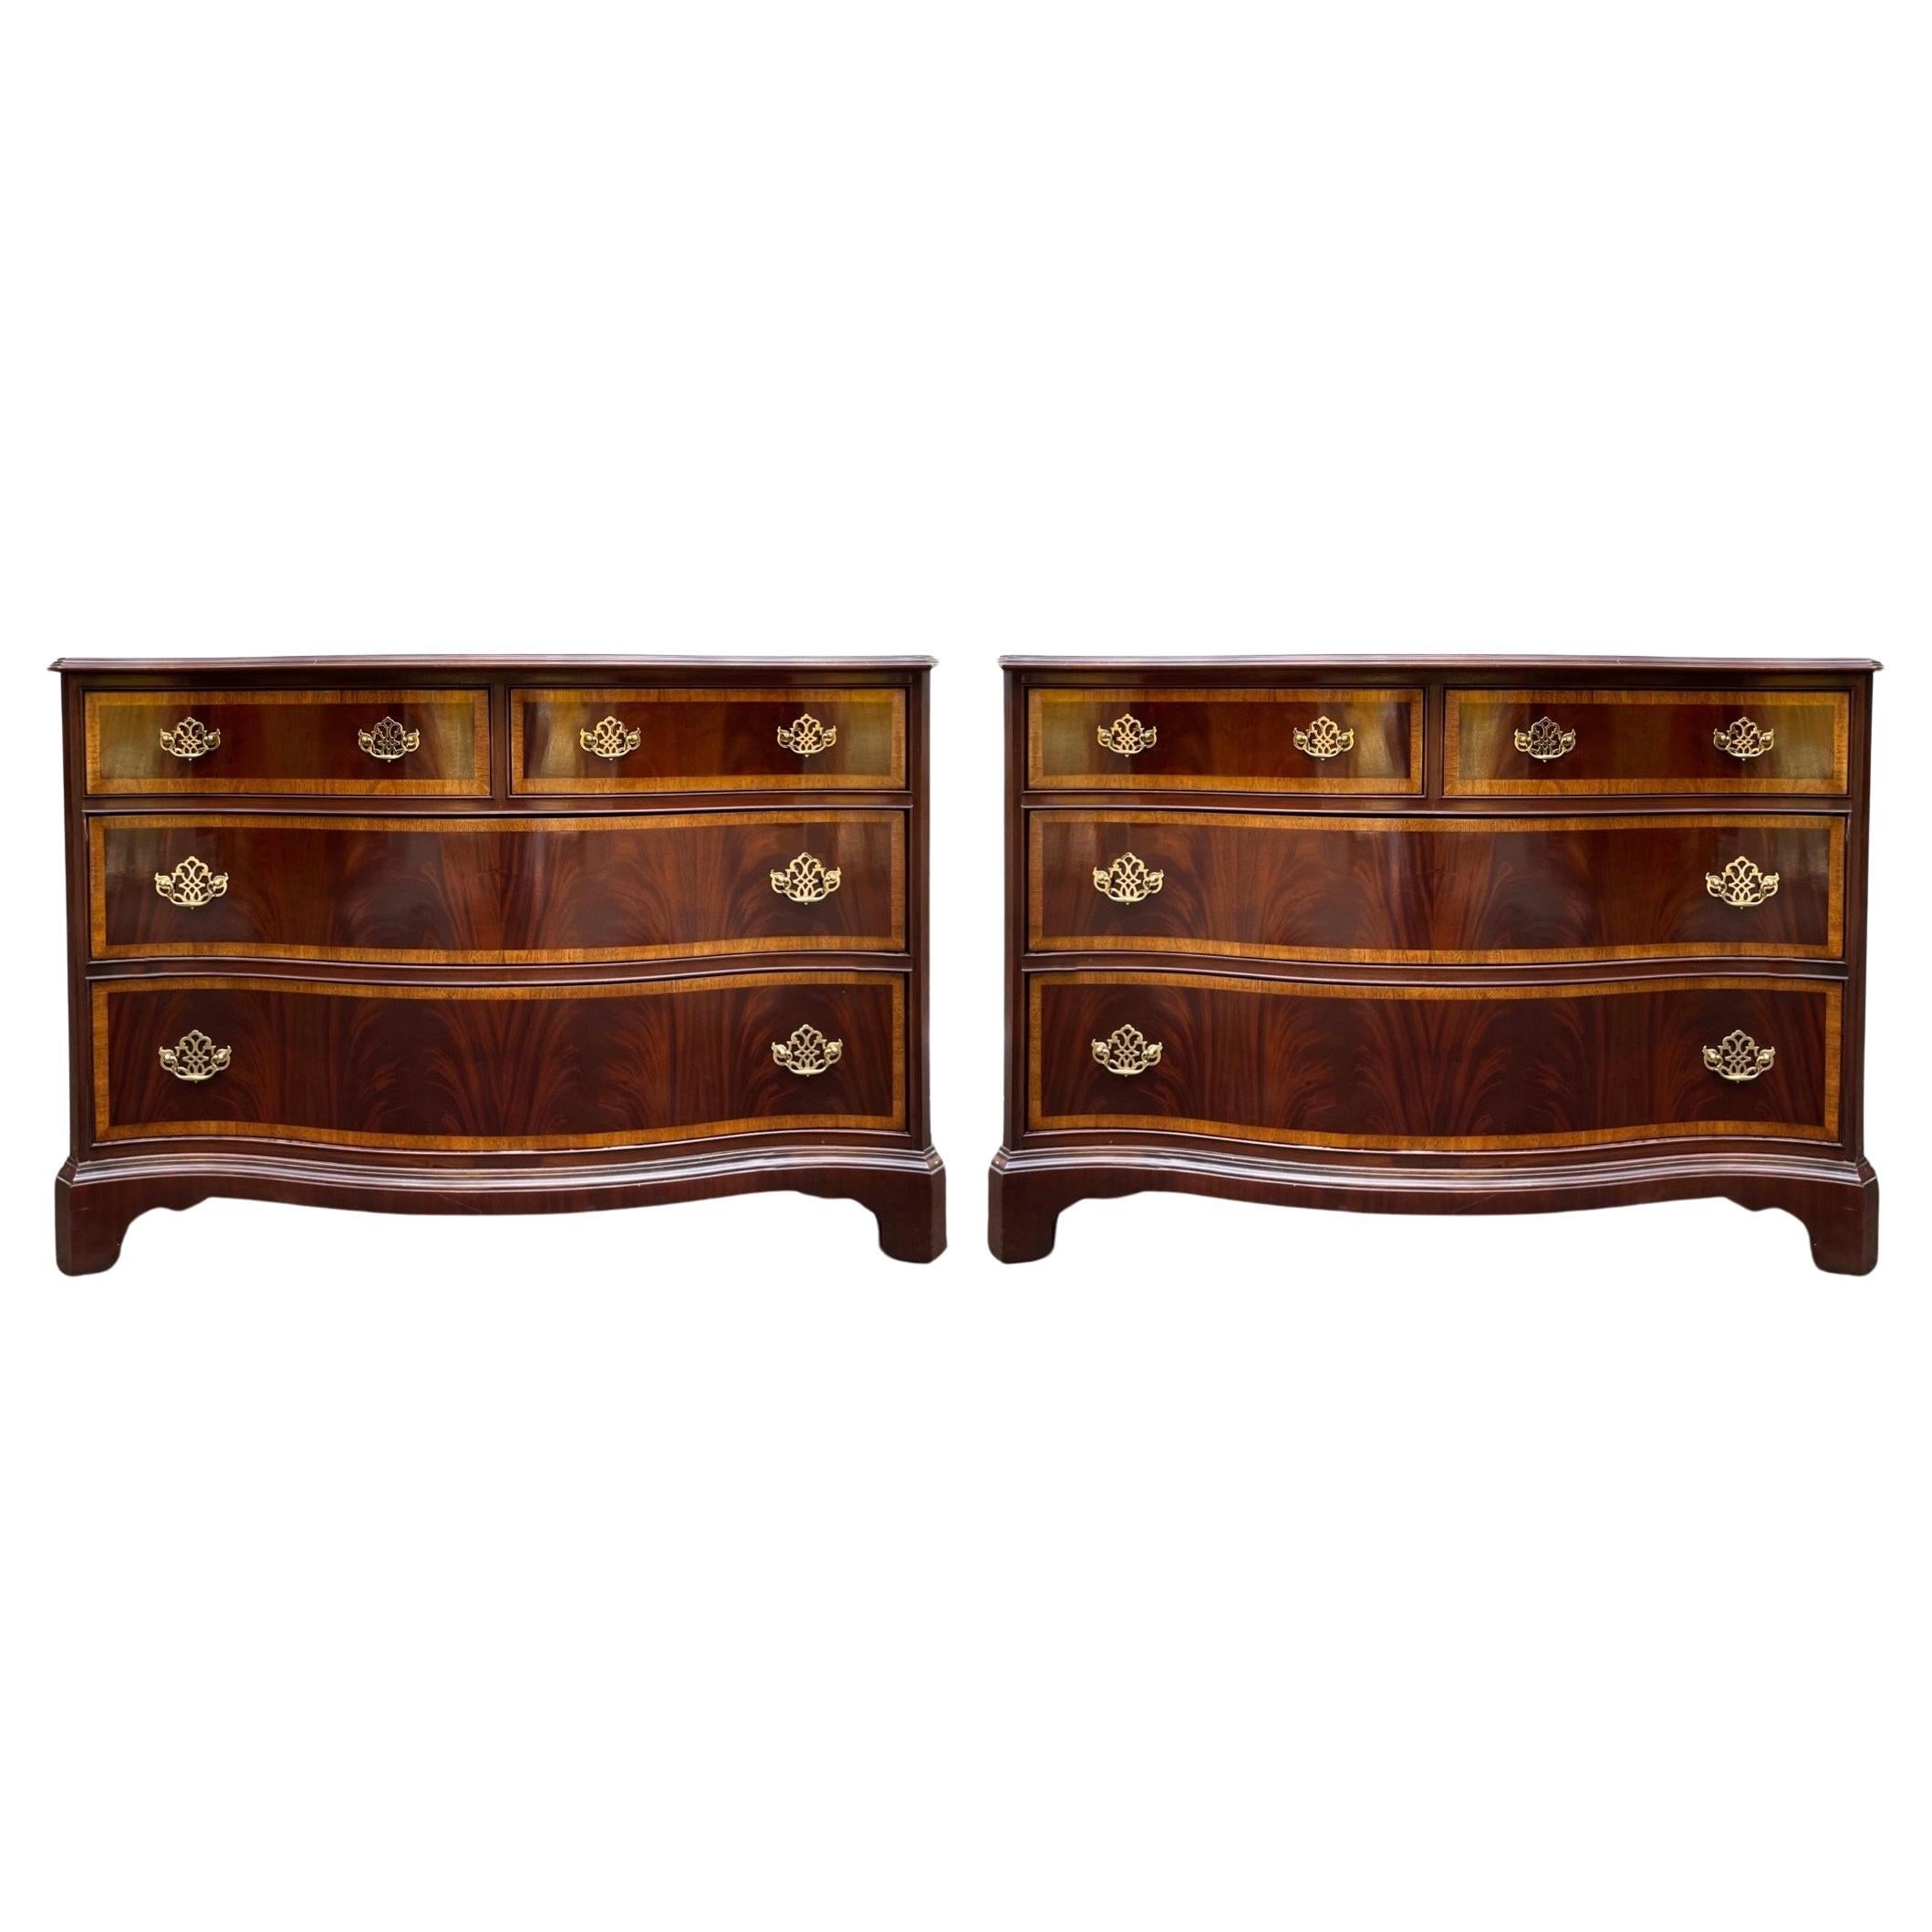 Hickory Furniture Chippendale Style Flame Mahogany Serpentine Chest - Pair